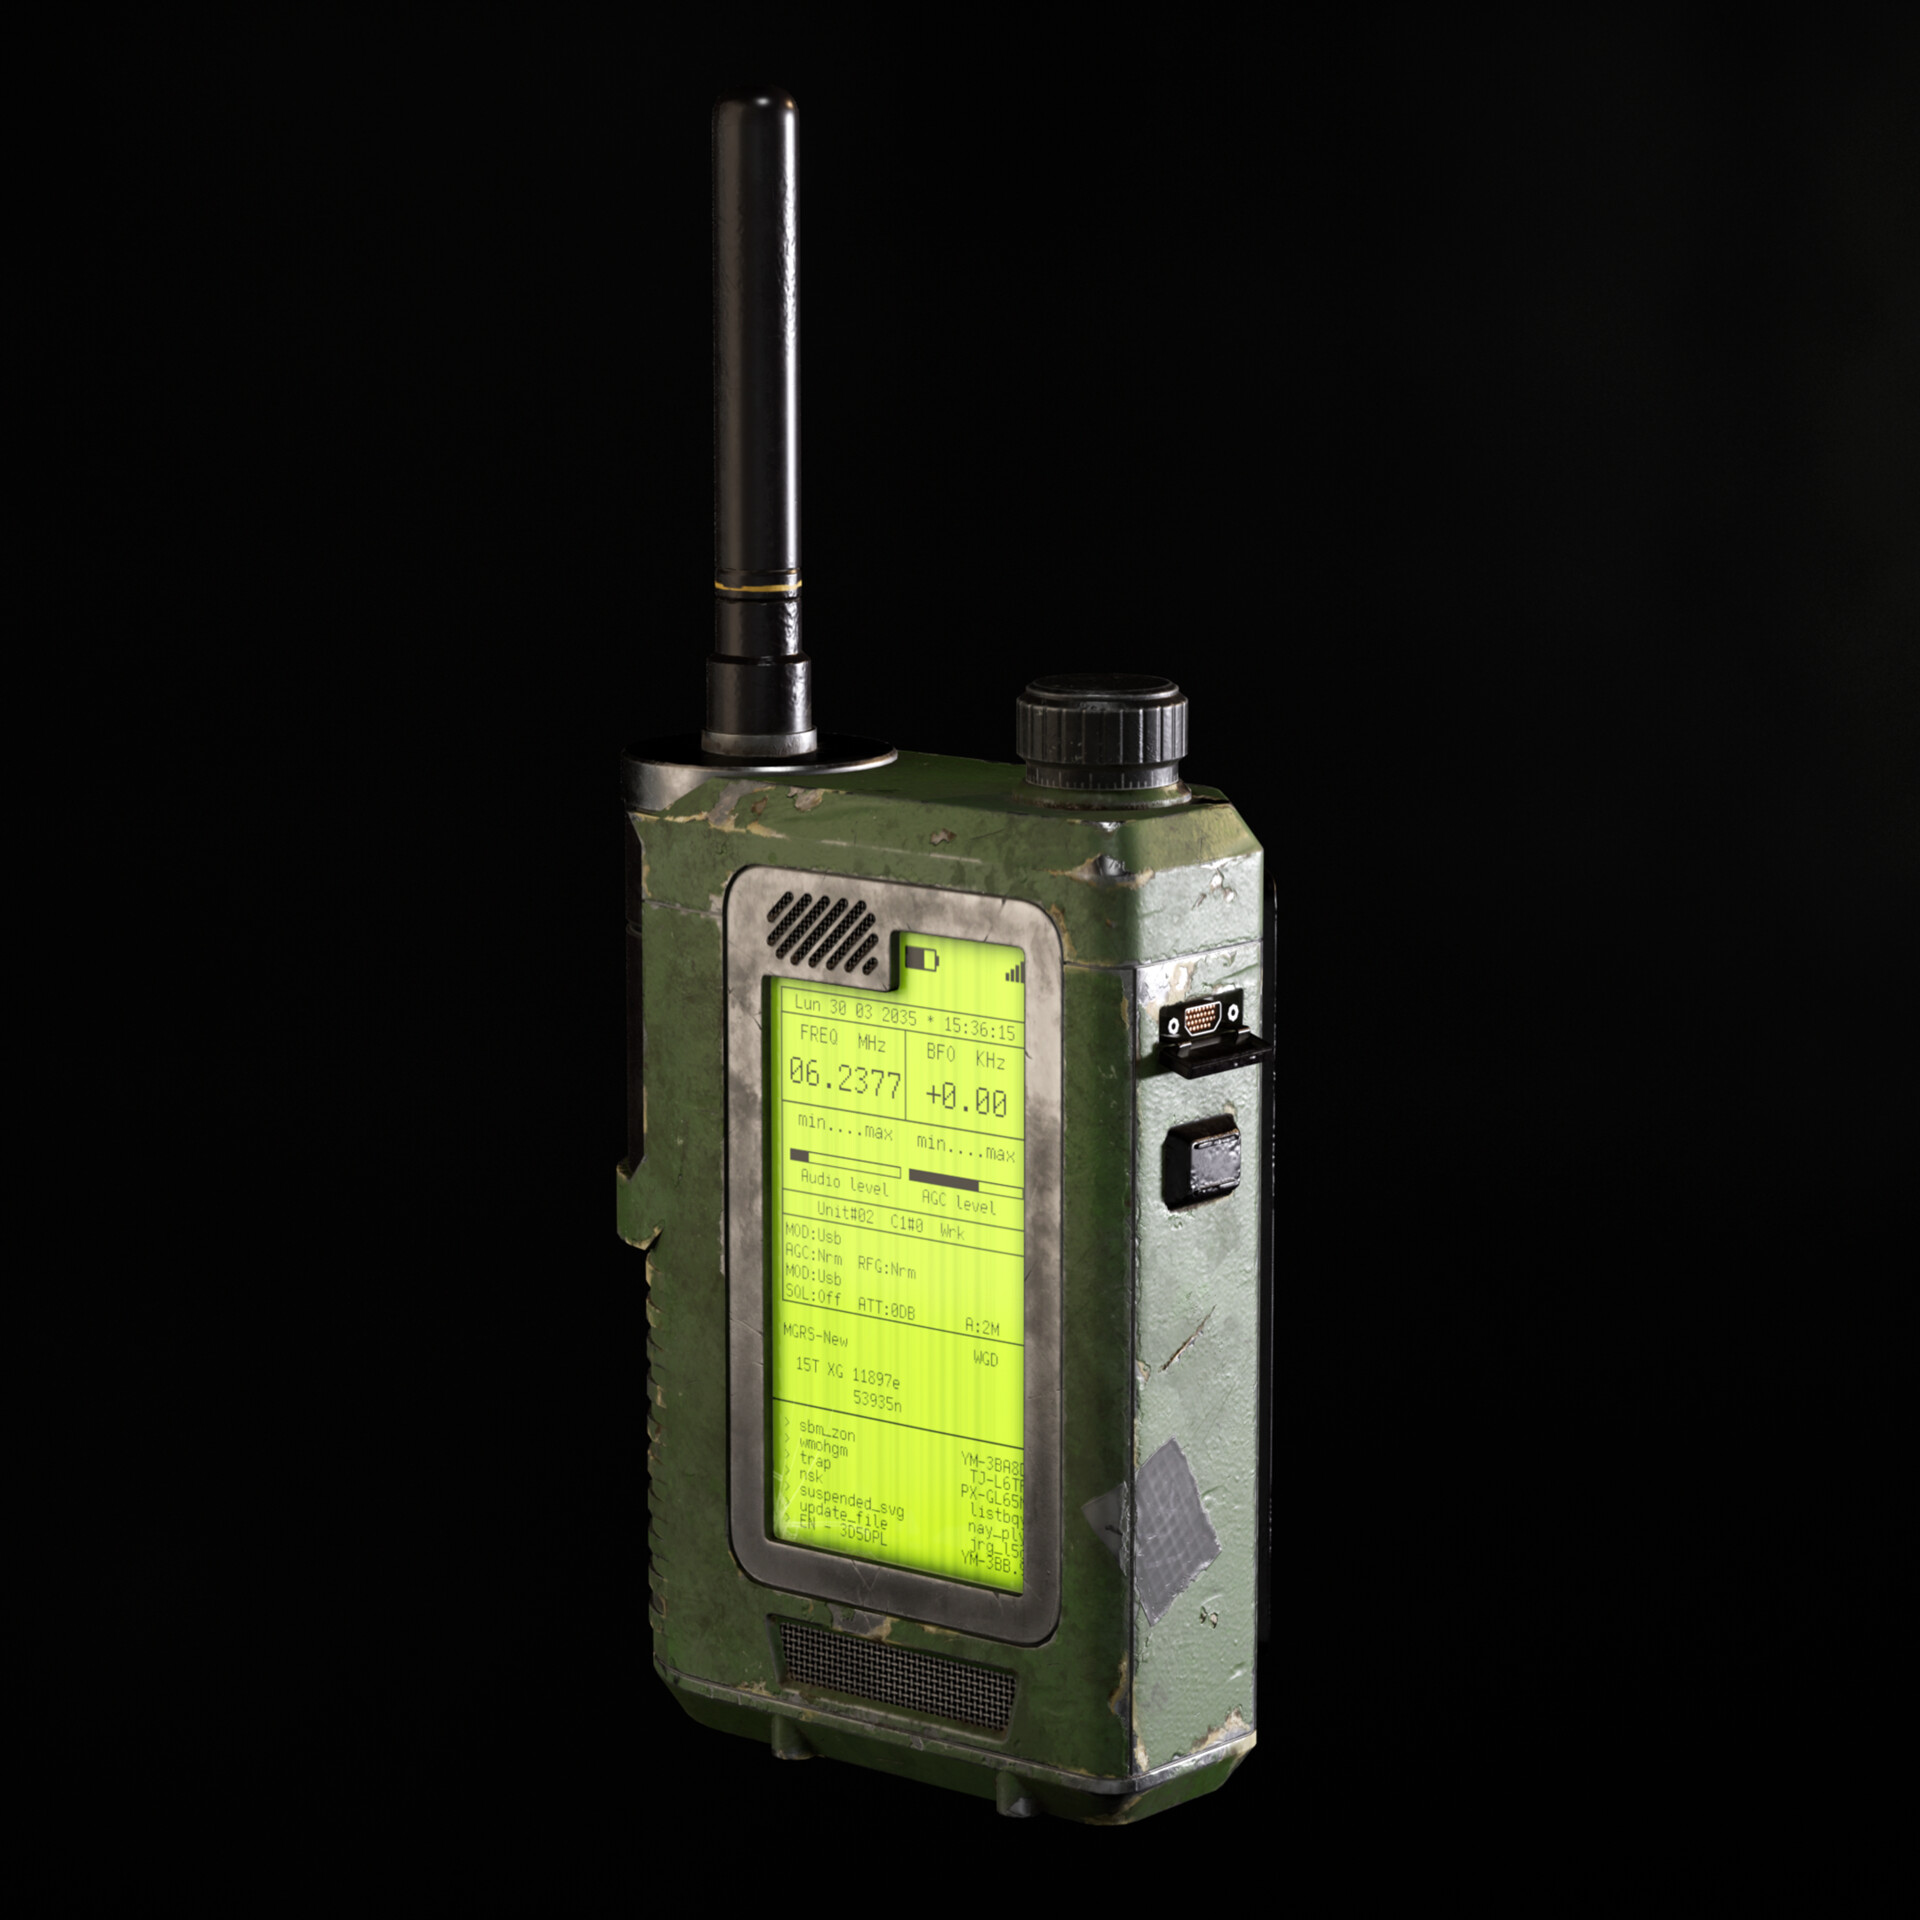 A render of a military style walkie talkie radio featuring signs of wear and tear.